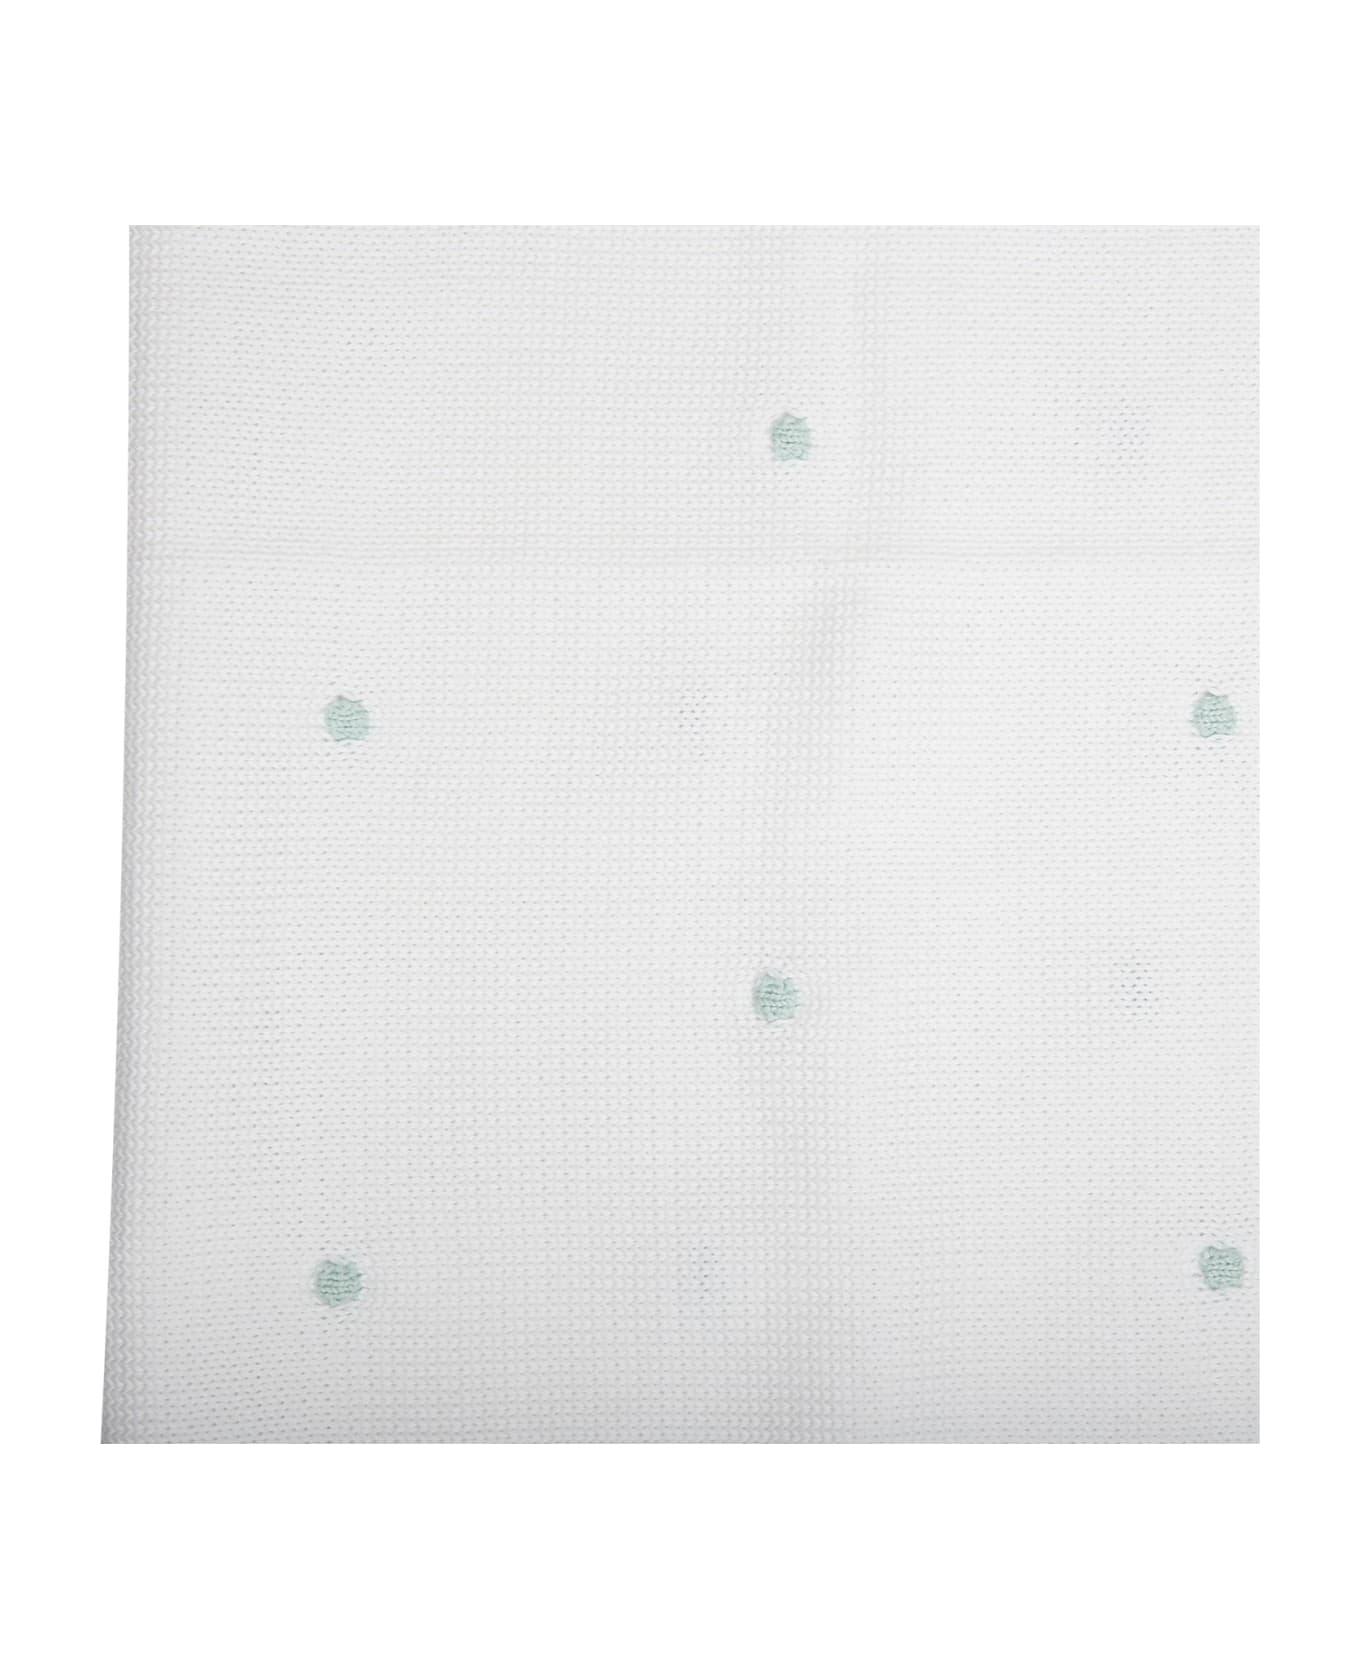 Little Bear White Baby Blanket For Baby Kids With Green Polka Dots - White